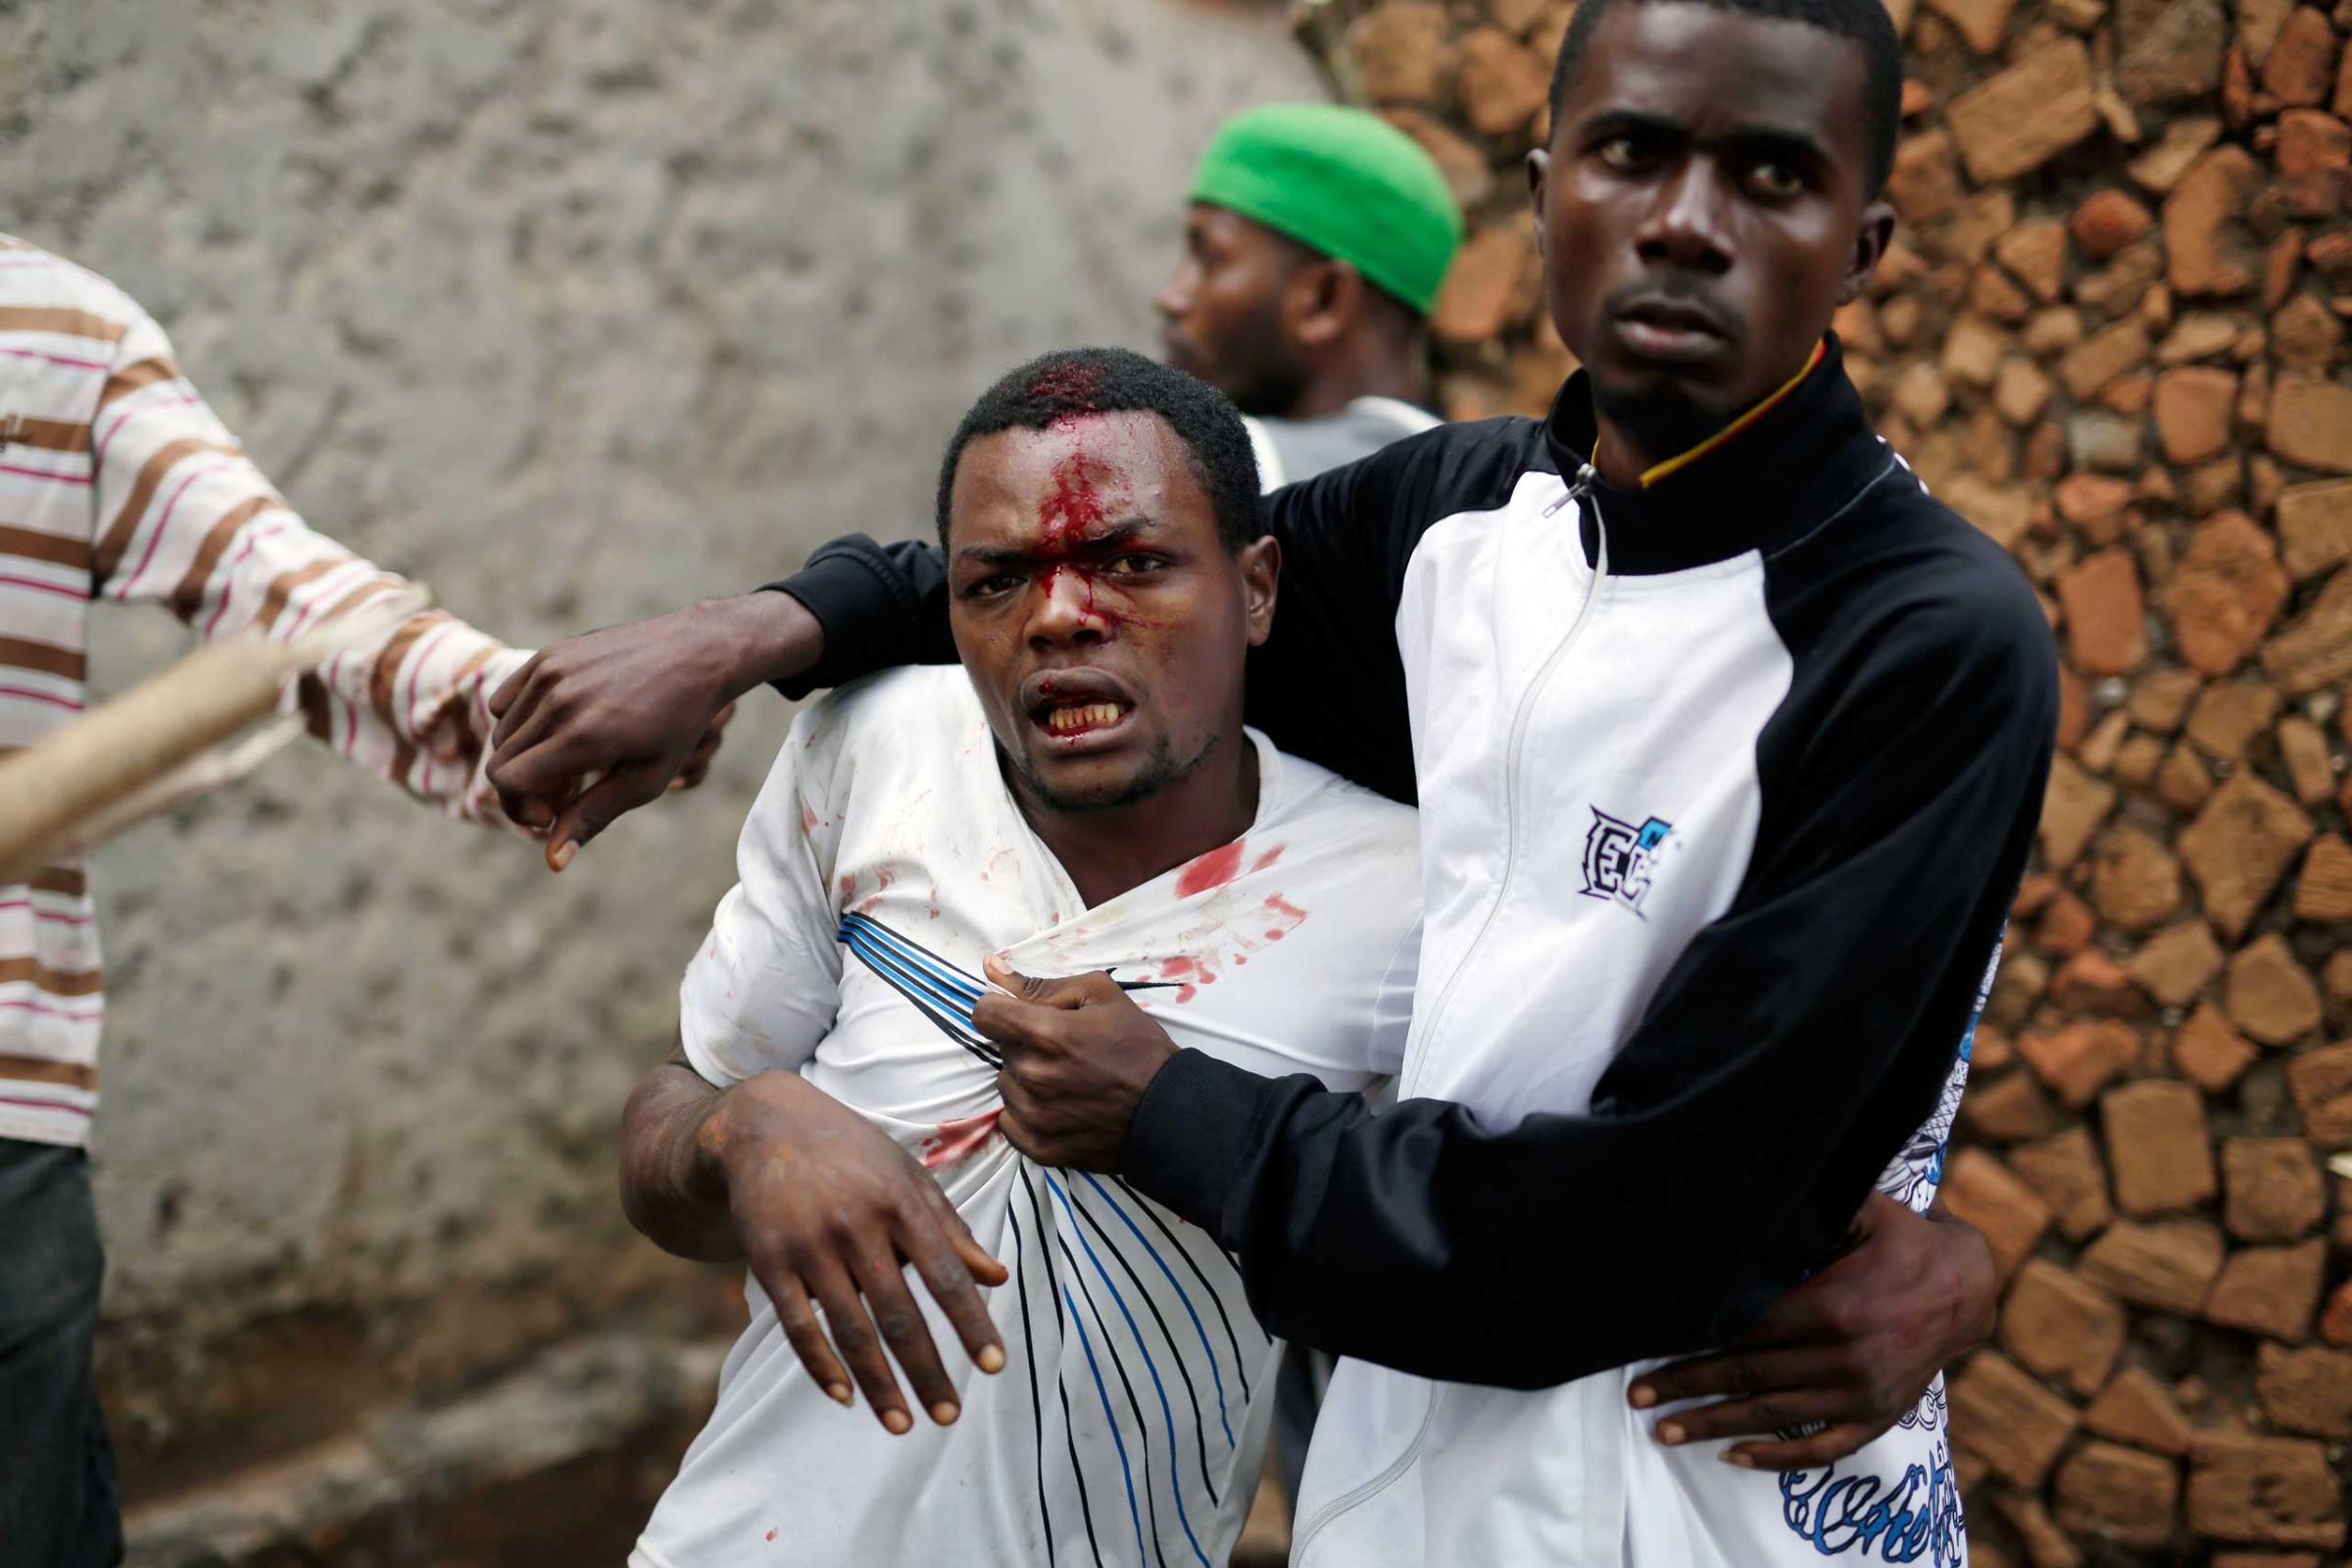 Jean Claude Niyonzima, a suspected member of the ruling party's Imbonerakure youth militia, is restrained as a mob gathers around his house, as protests continue against President Pierre Nkurunziza's decision to seek a third term in office in the Cibitoke district of Bujumbura, Burundi on May 7, 2015.